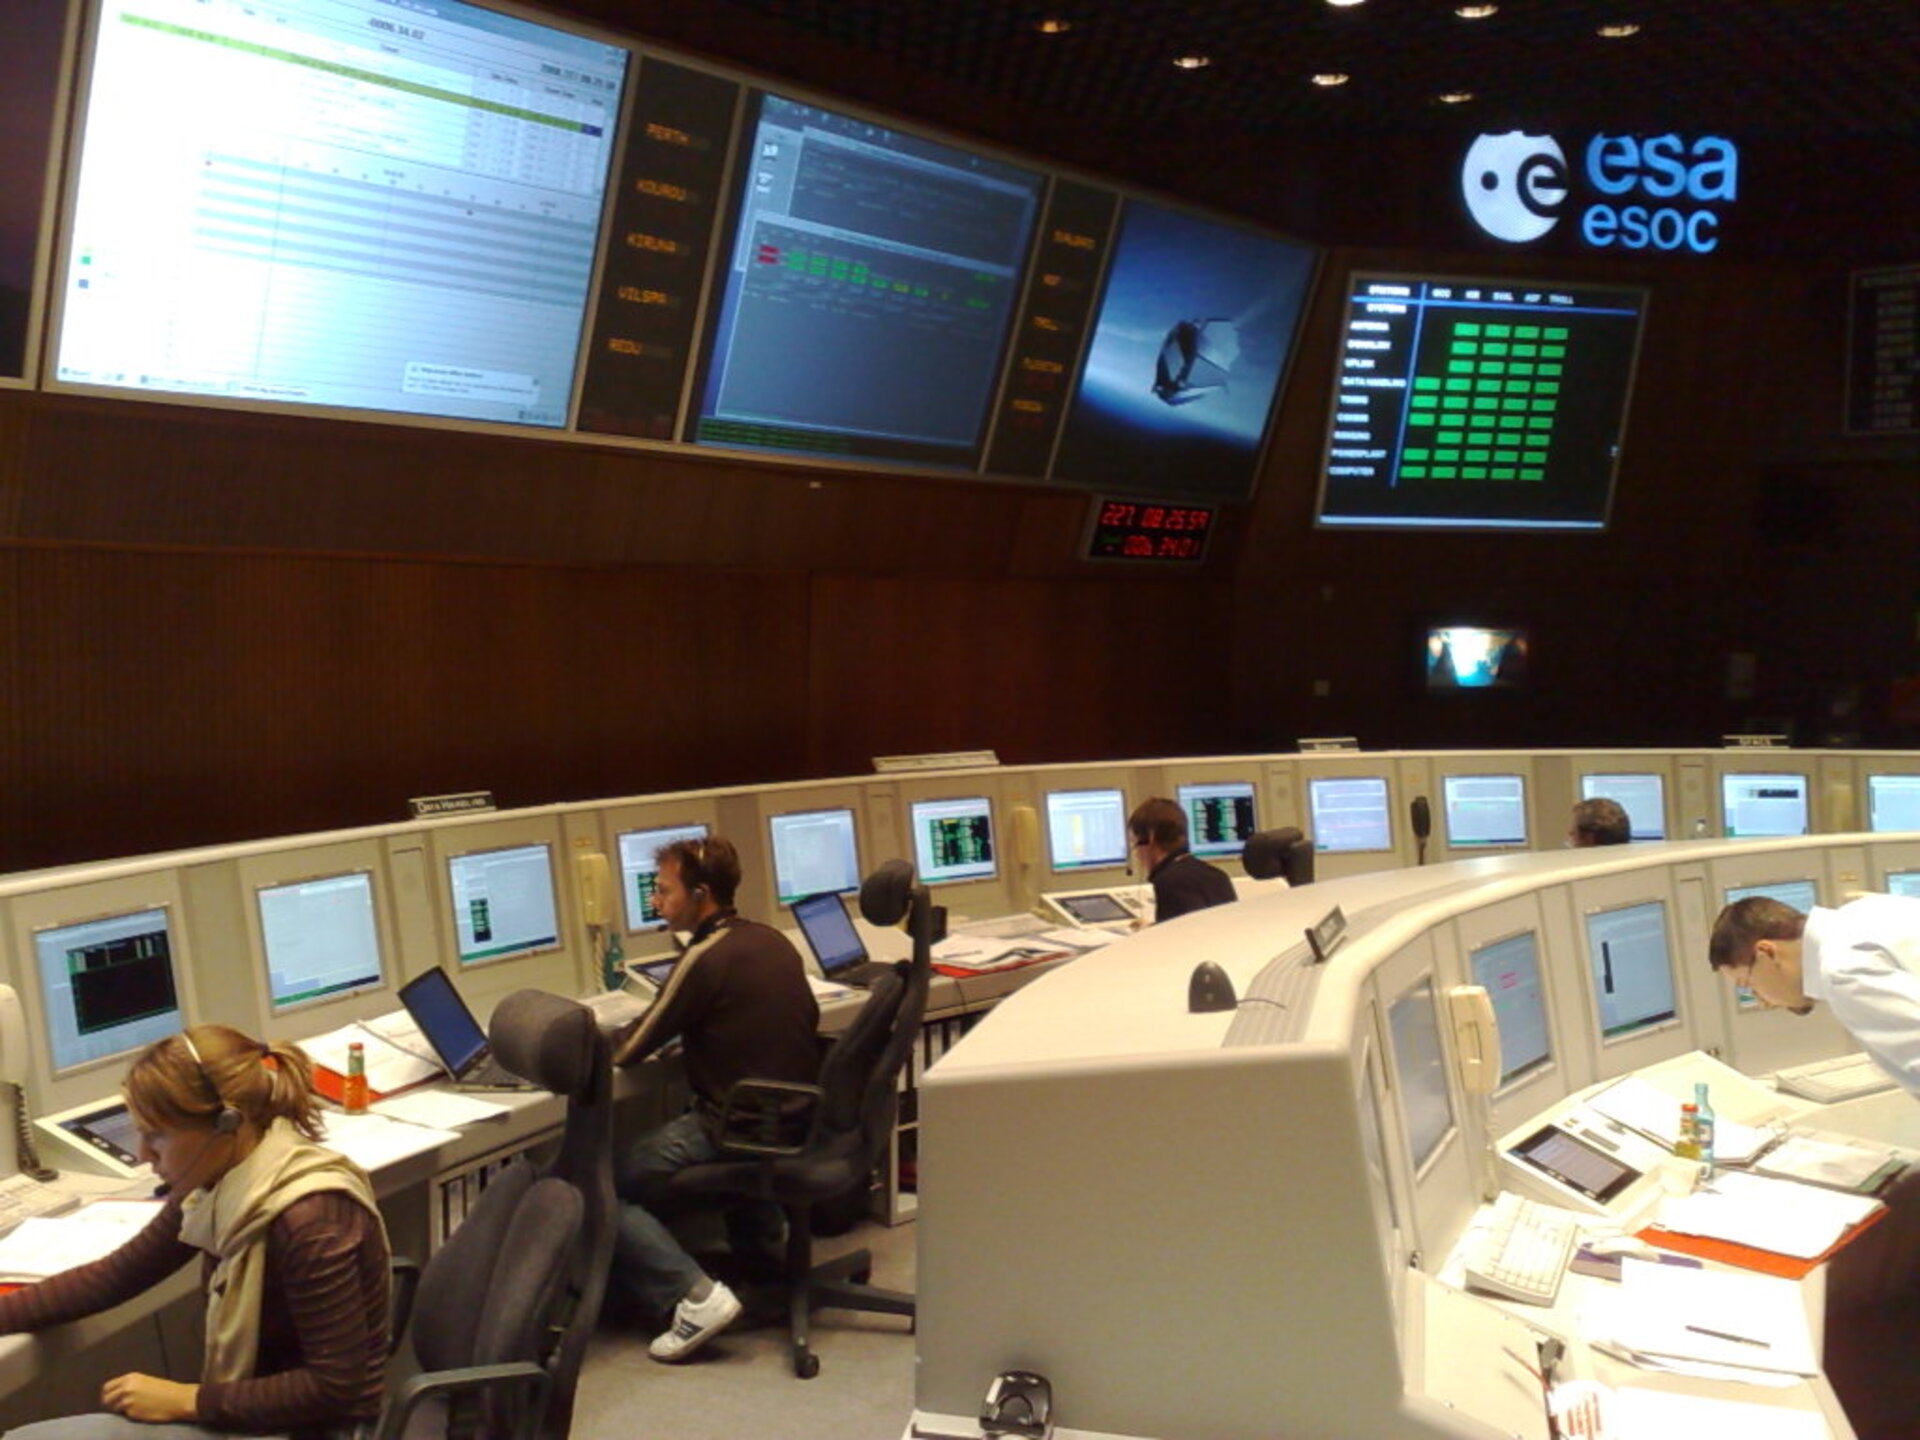 The 14 August simulation included both the A and B sections of the GOCE Flight Control Team